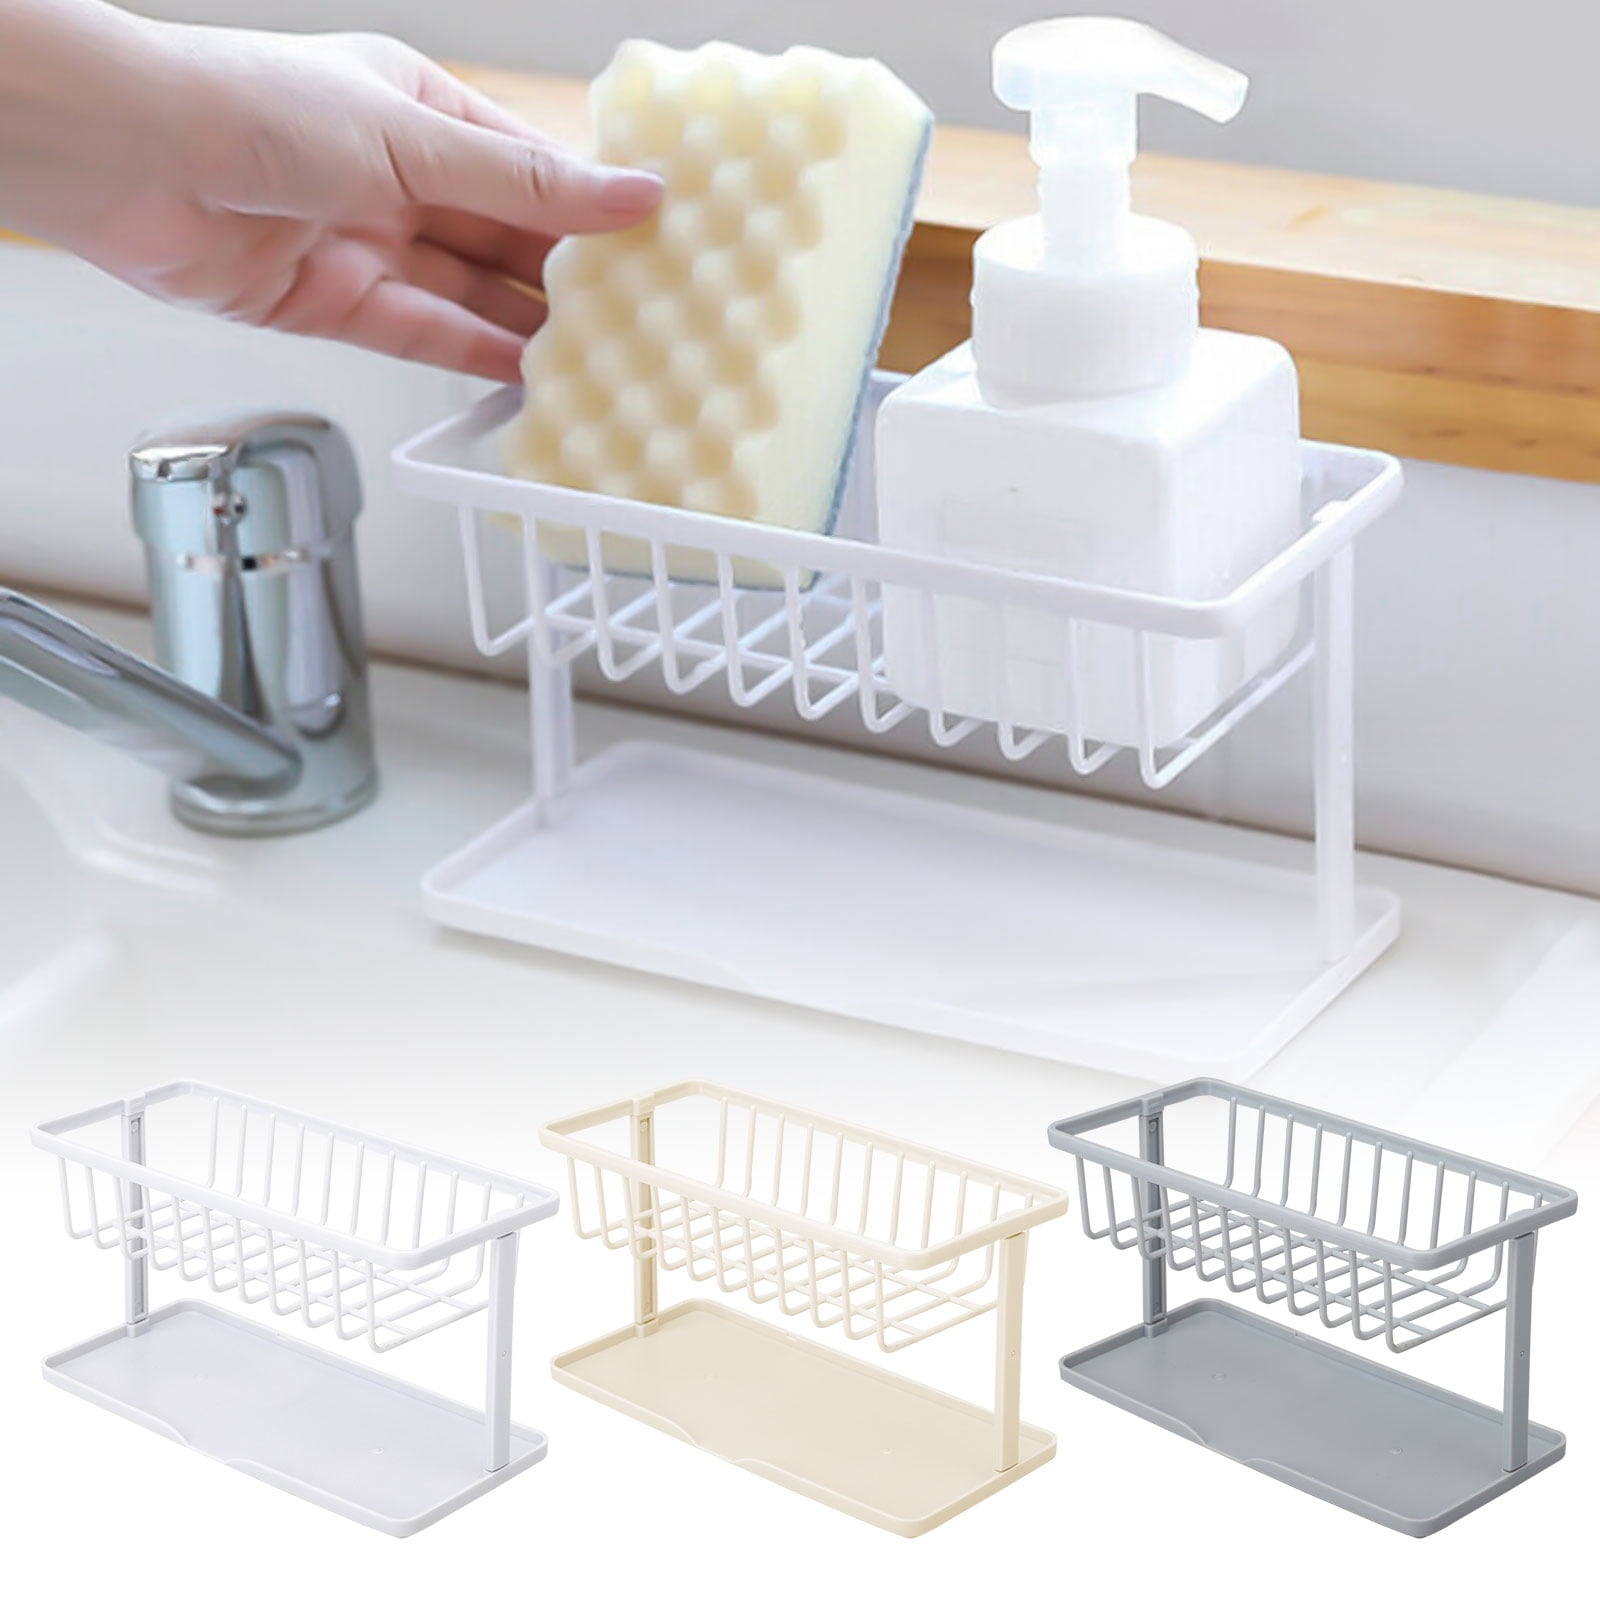 Kitchen Tools Sink Corners Storage Rack Sponge Holder Wall Mounted Suctions Cups 